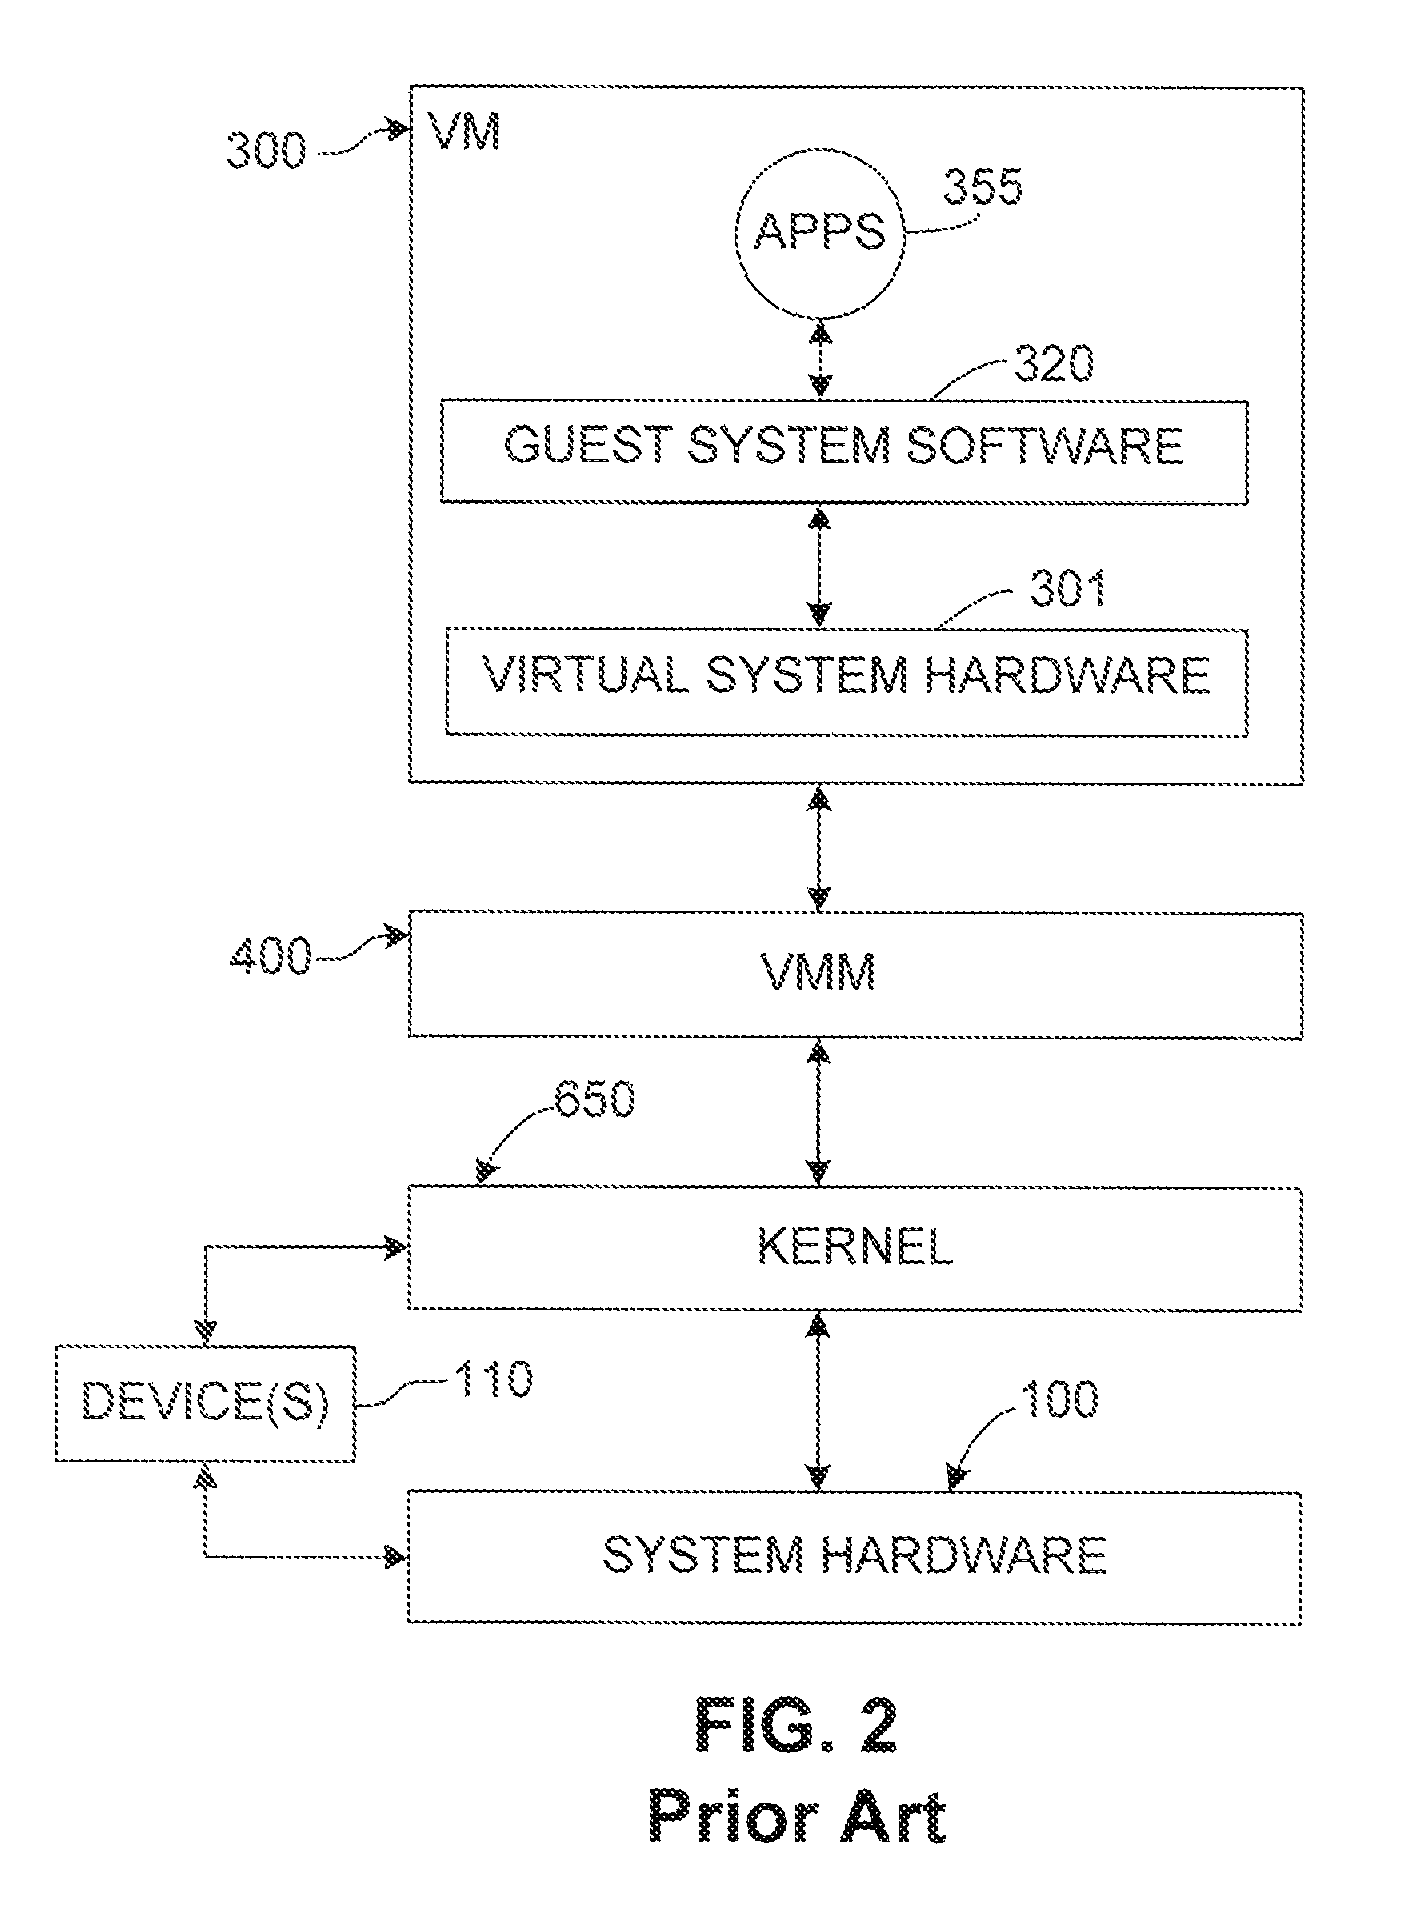 Method and apparatus for emulating multiple virtual timers in a virtual computer system when the virtual timers fall behind the real time of a physical computer system